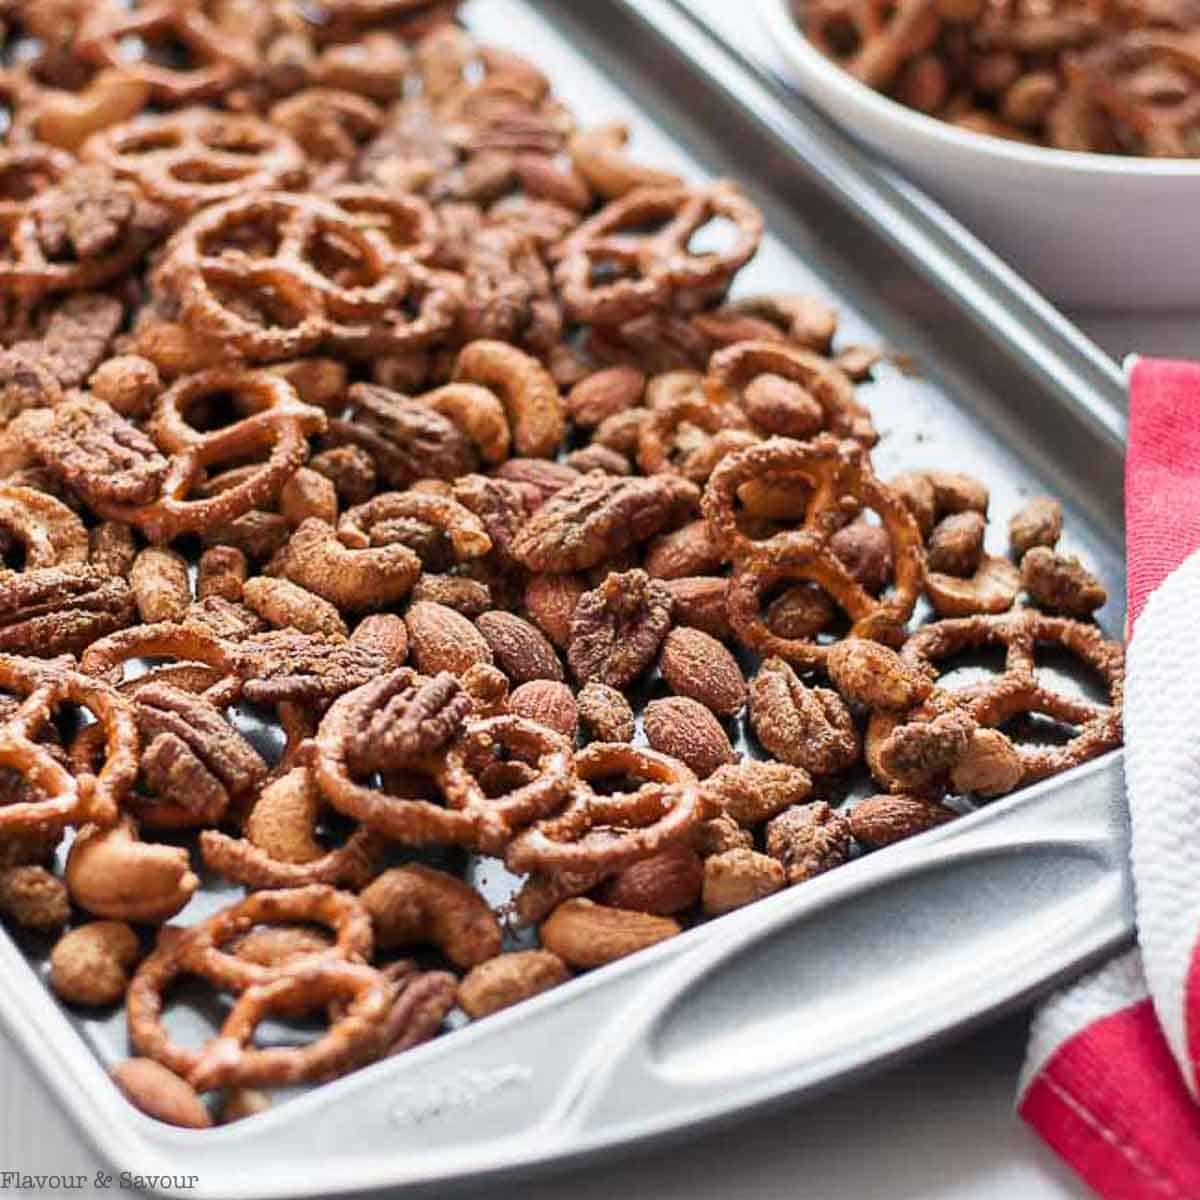 Pretzel and Nut Snack Mix on a baking tray.